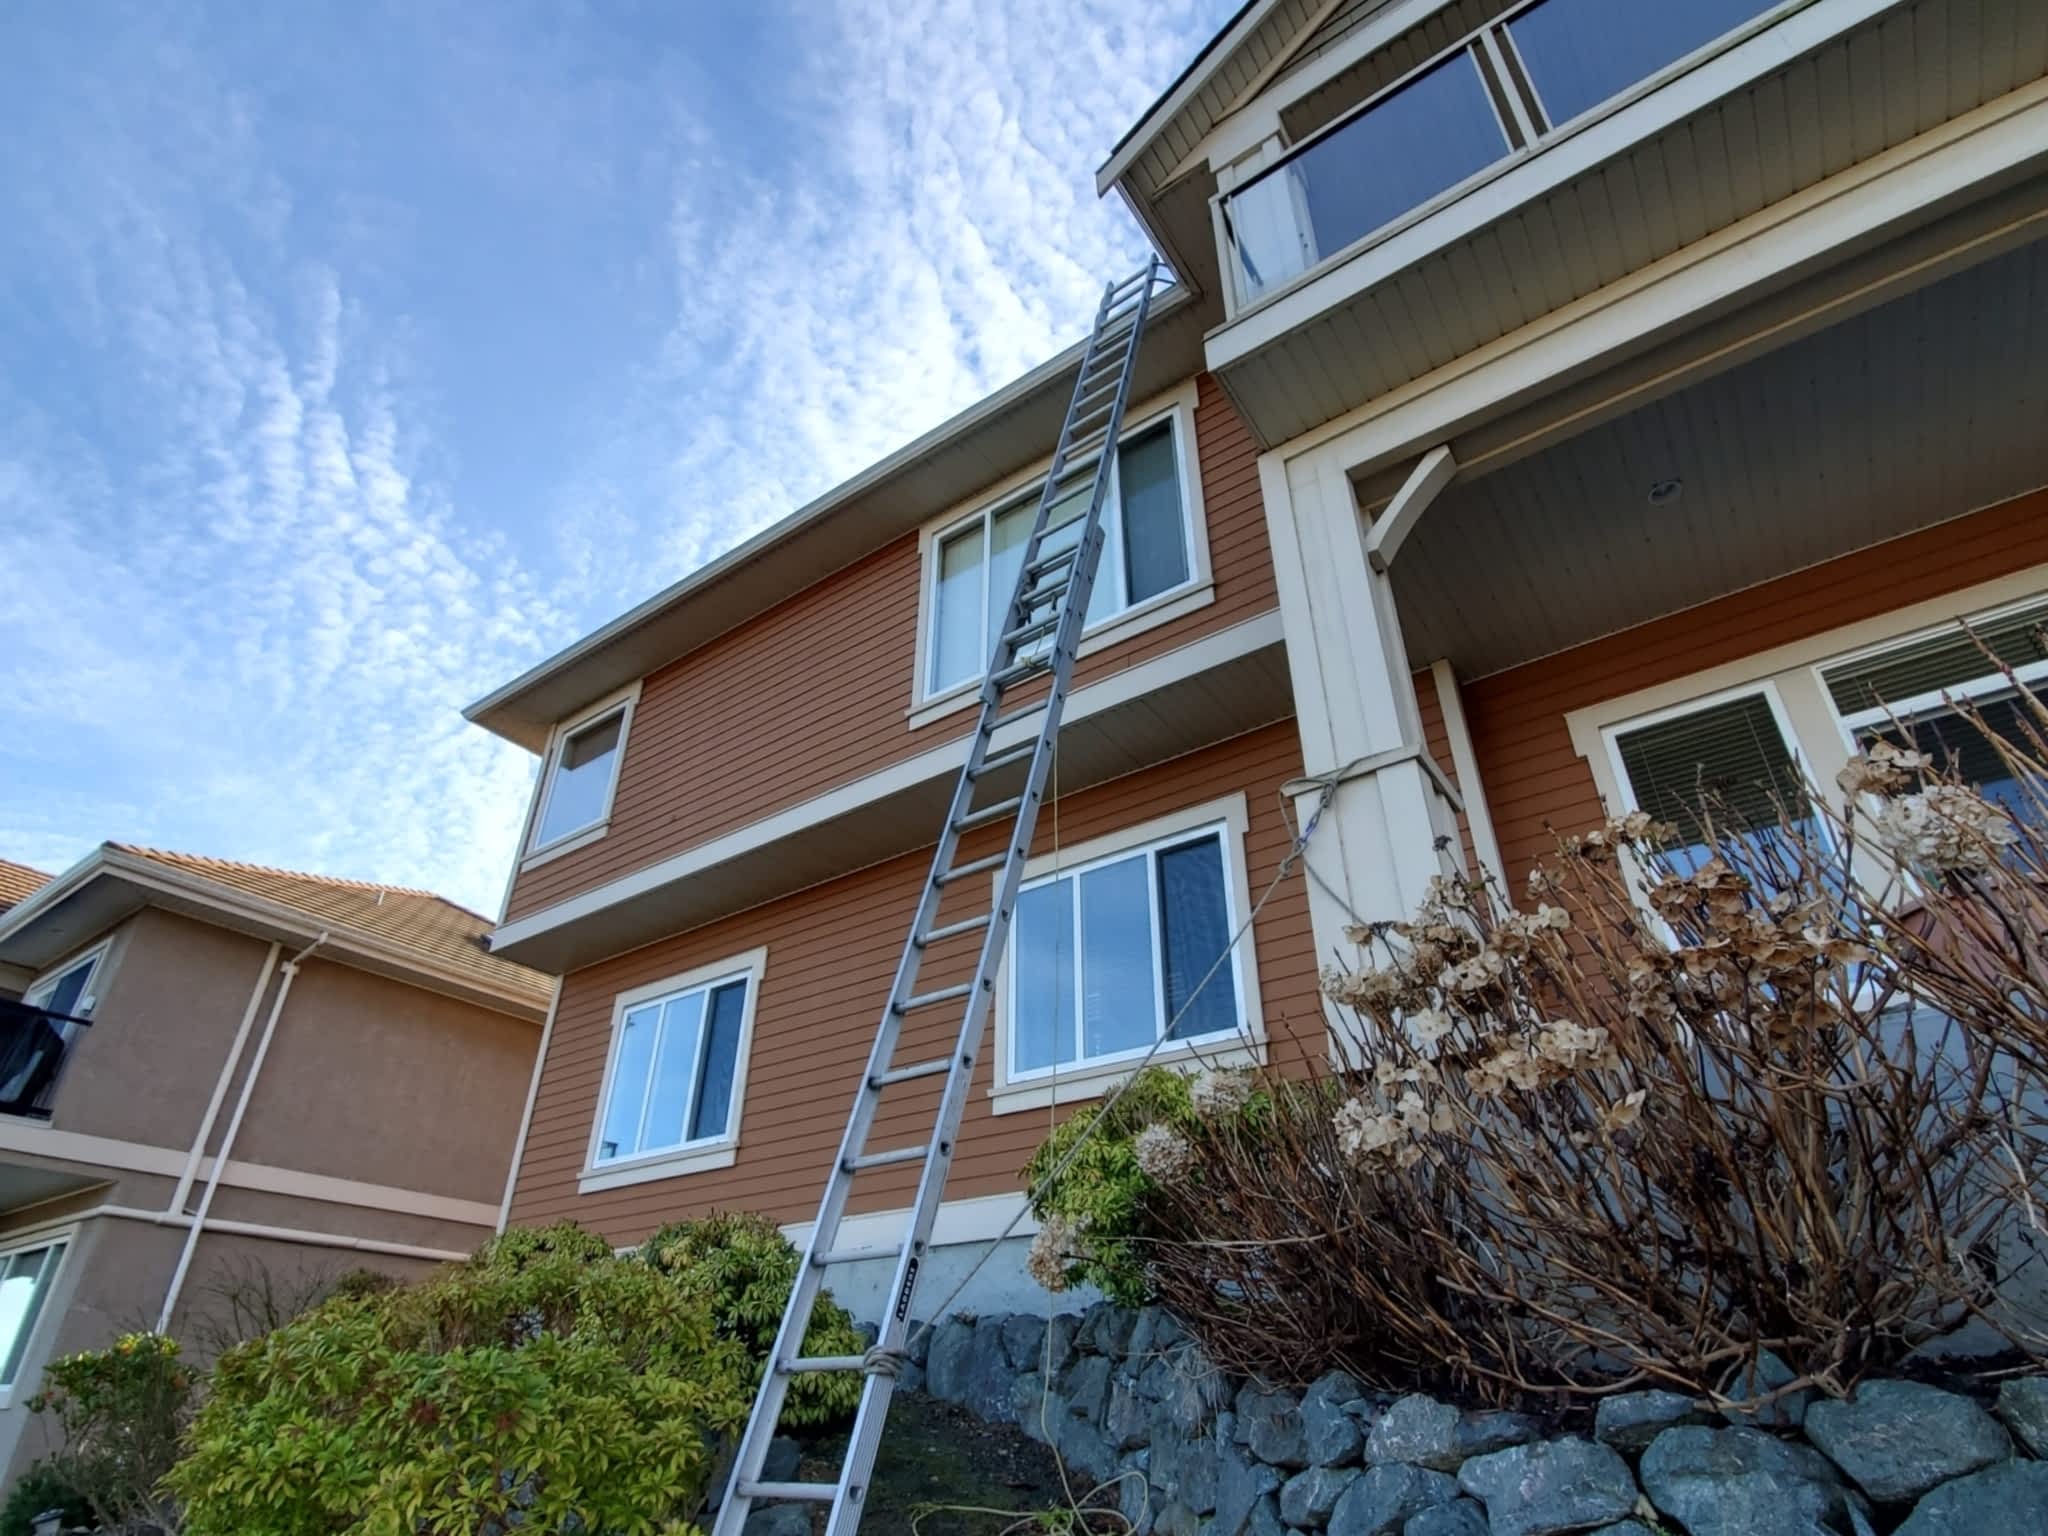 photo Island's Best Window Cleaning & More!